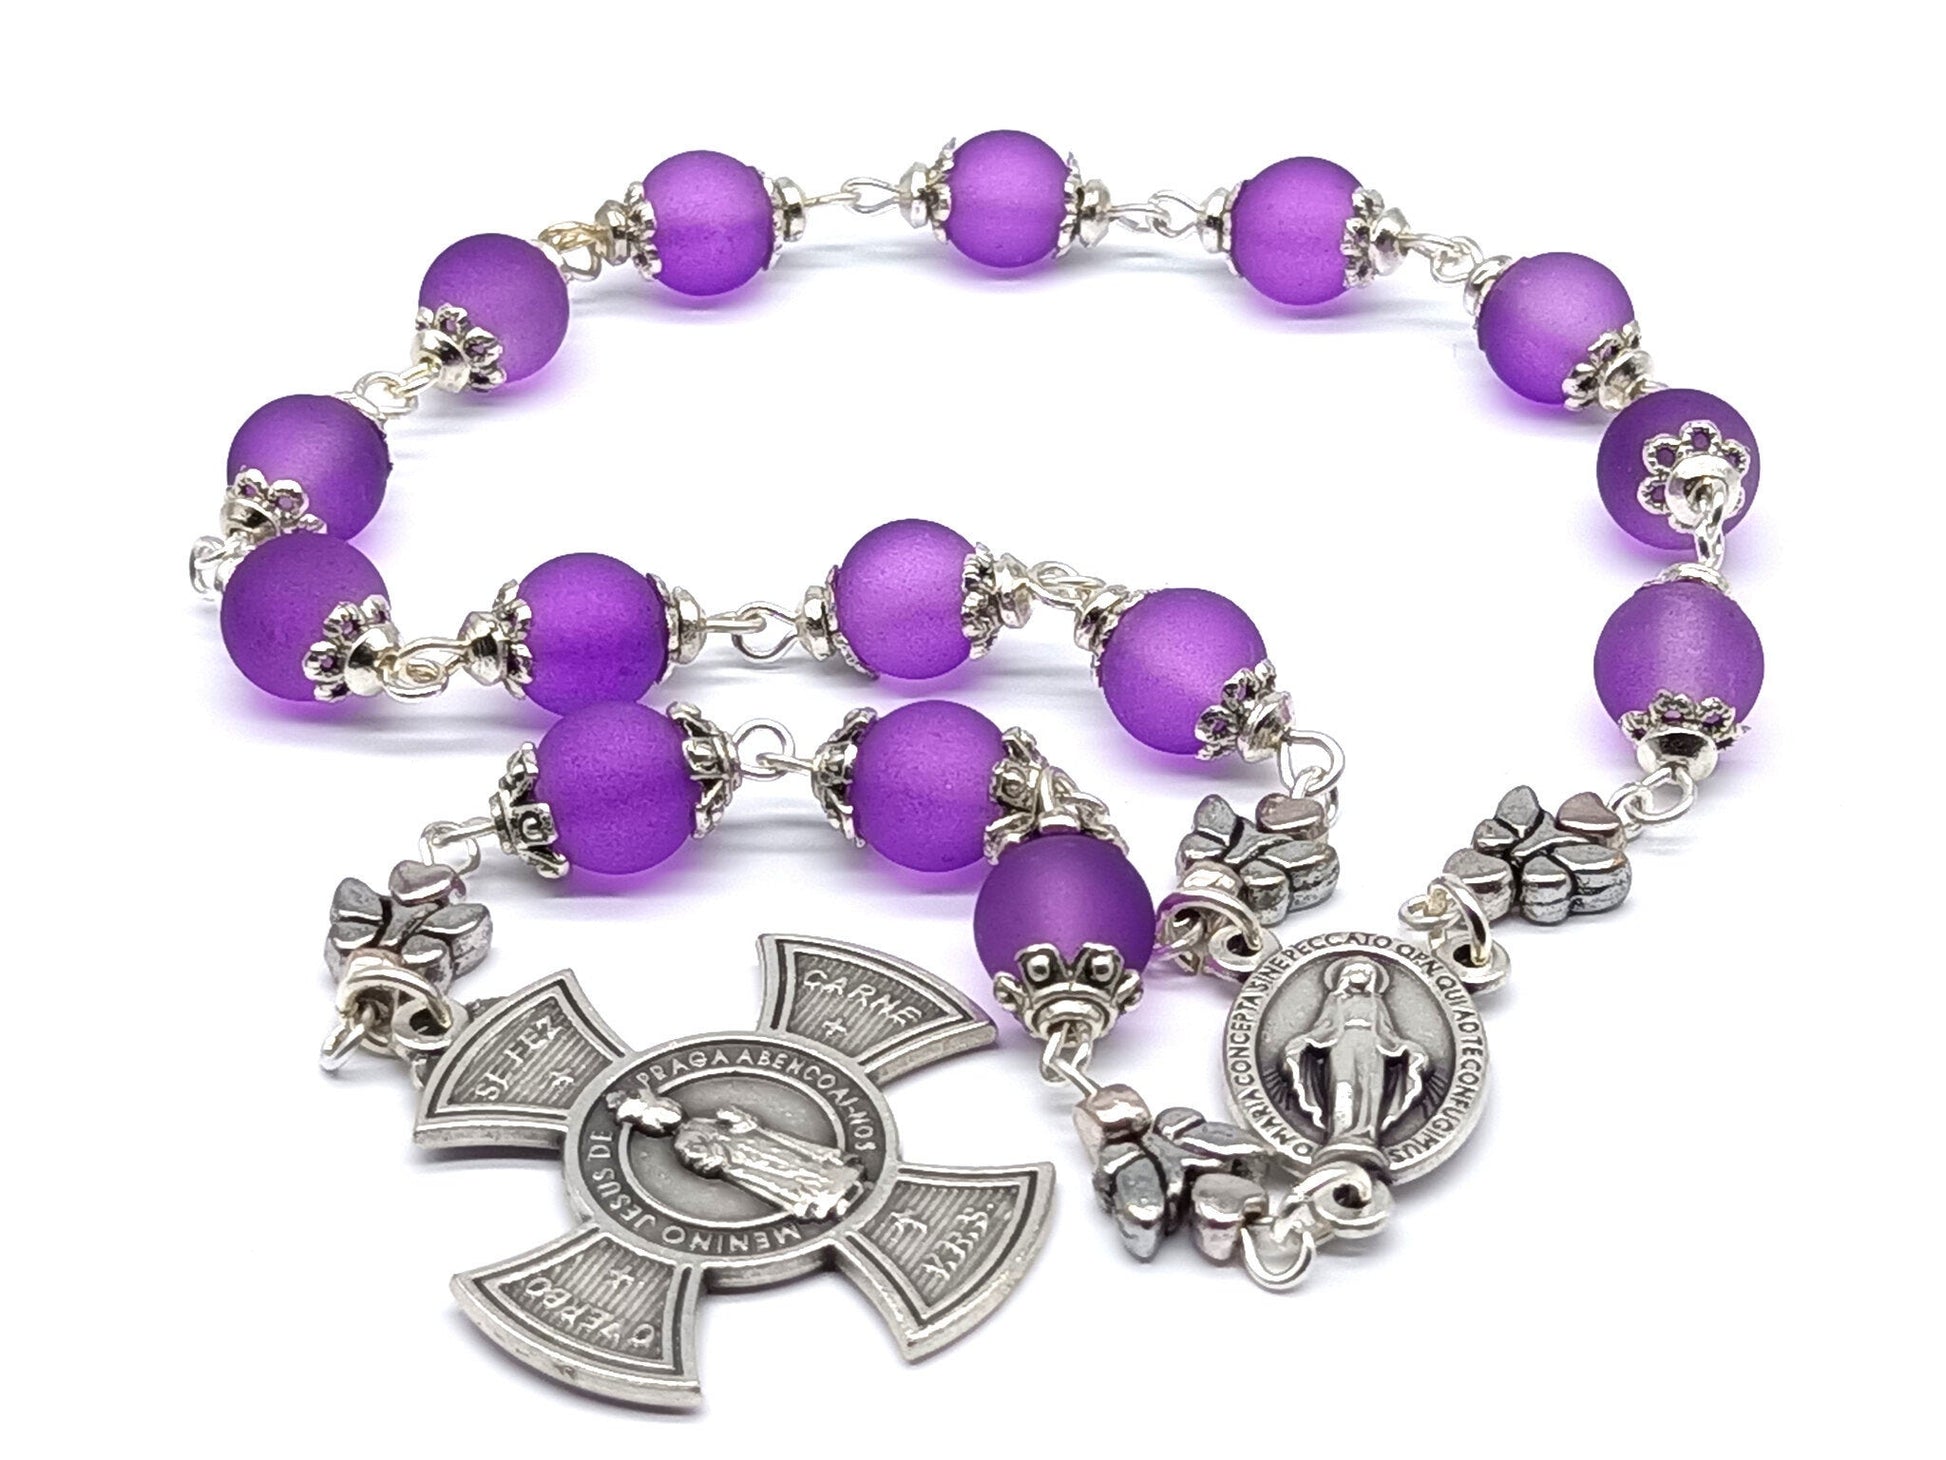 Infant of Prague unique rosary beads prayer chaplet with purple frosted glass beads and silver cross and miraculous medal.